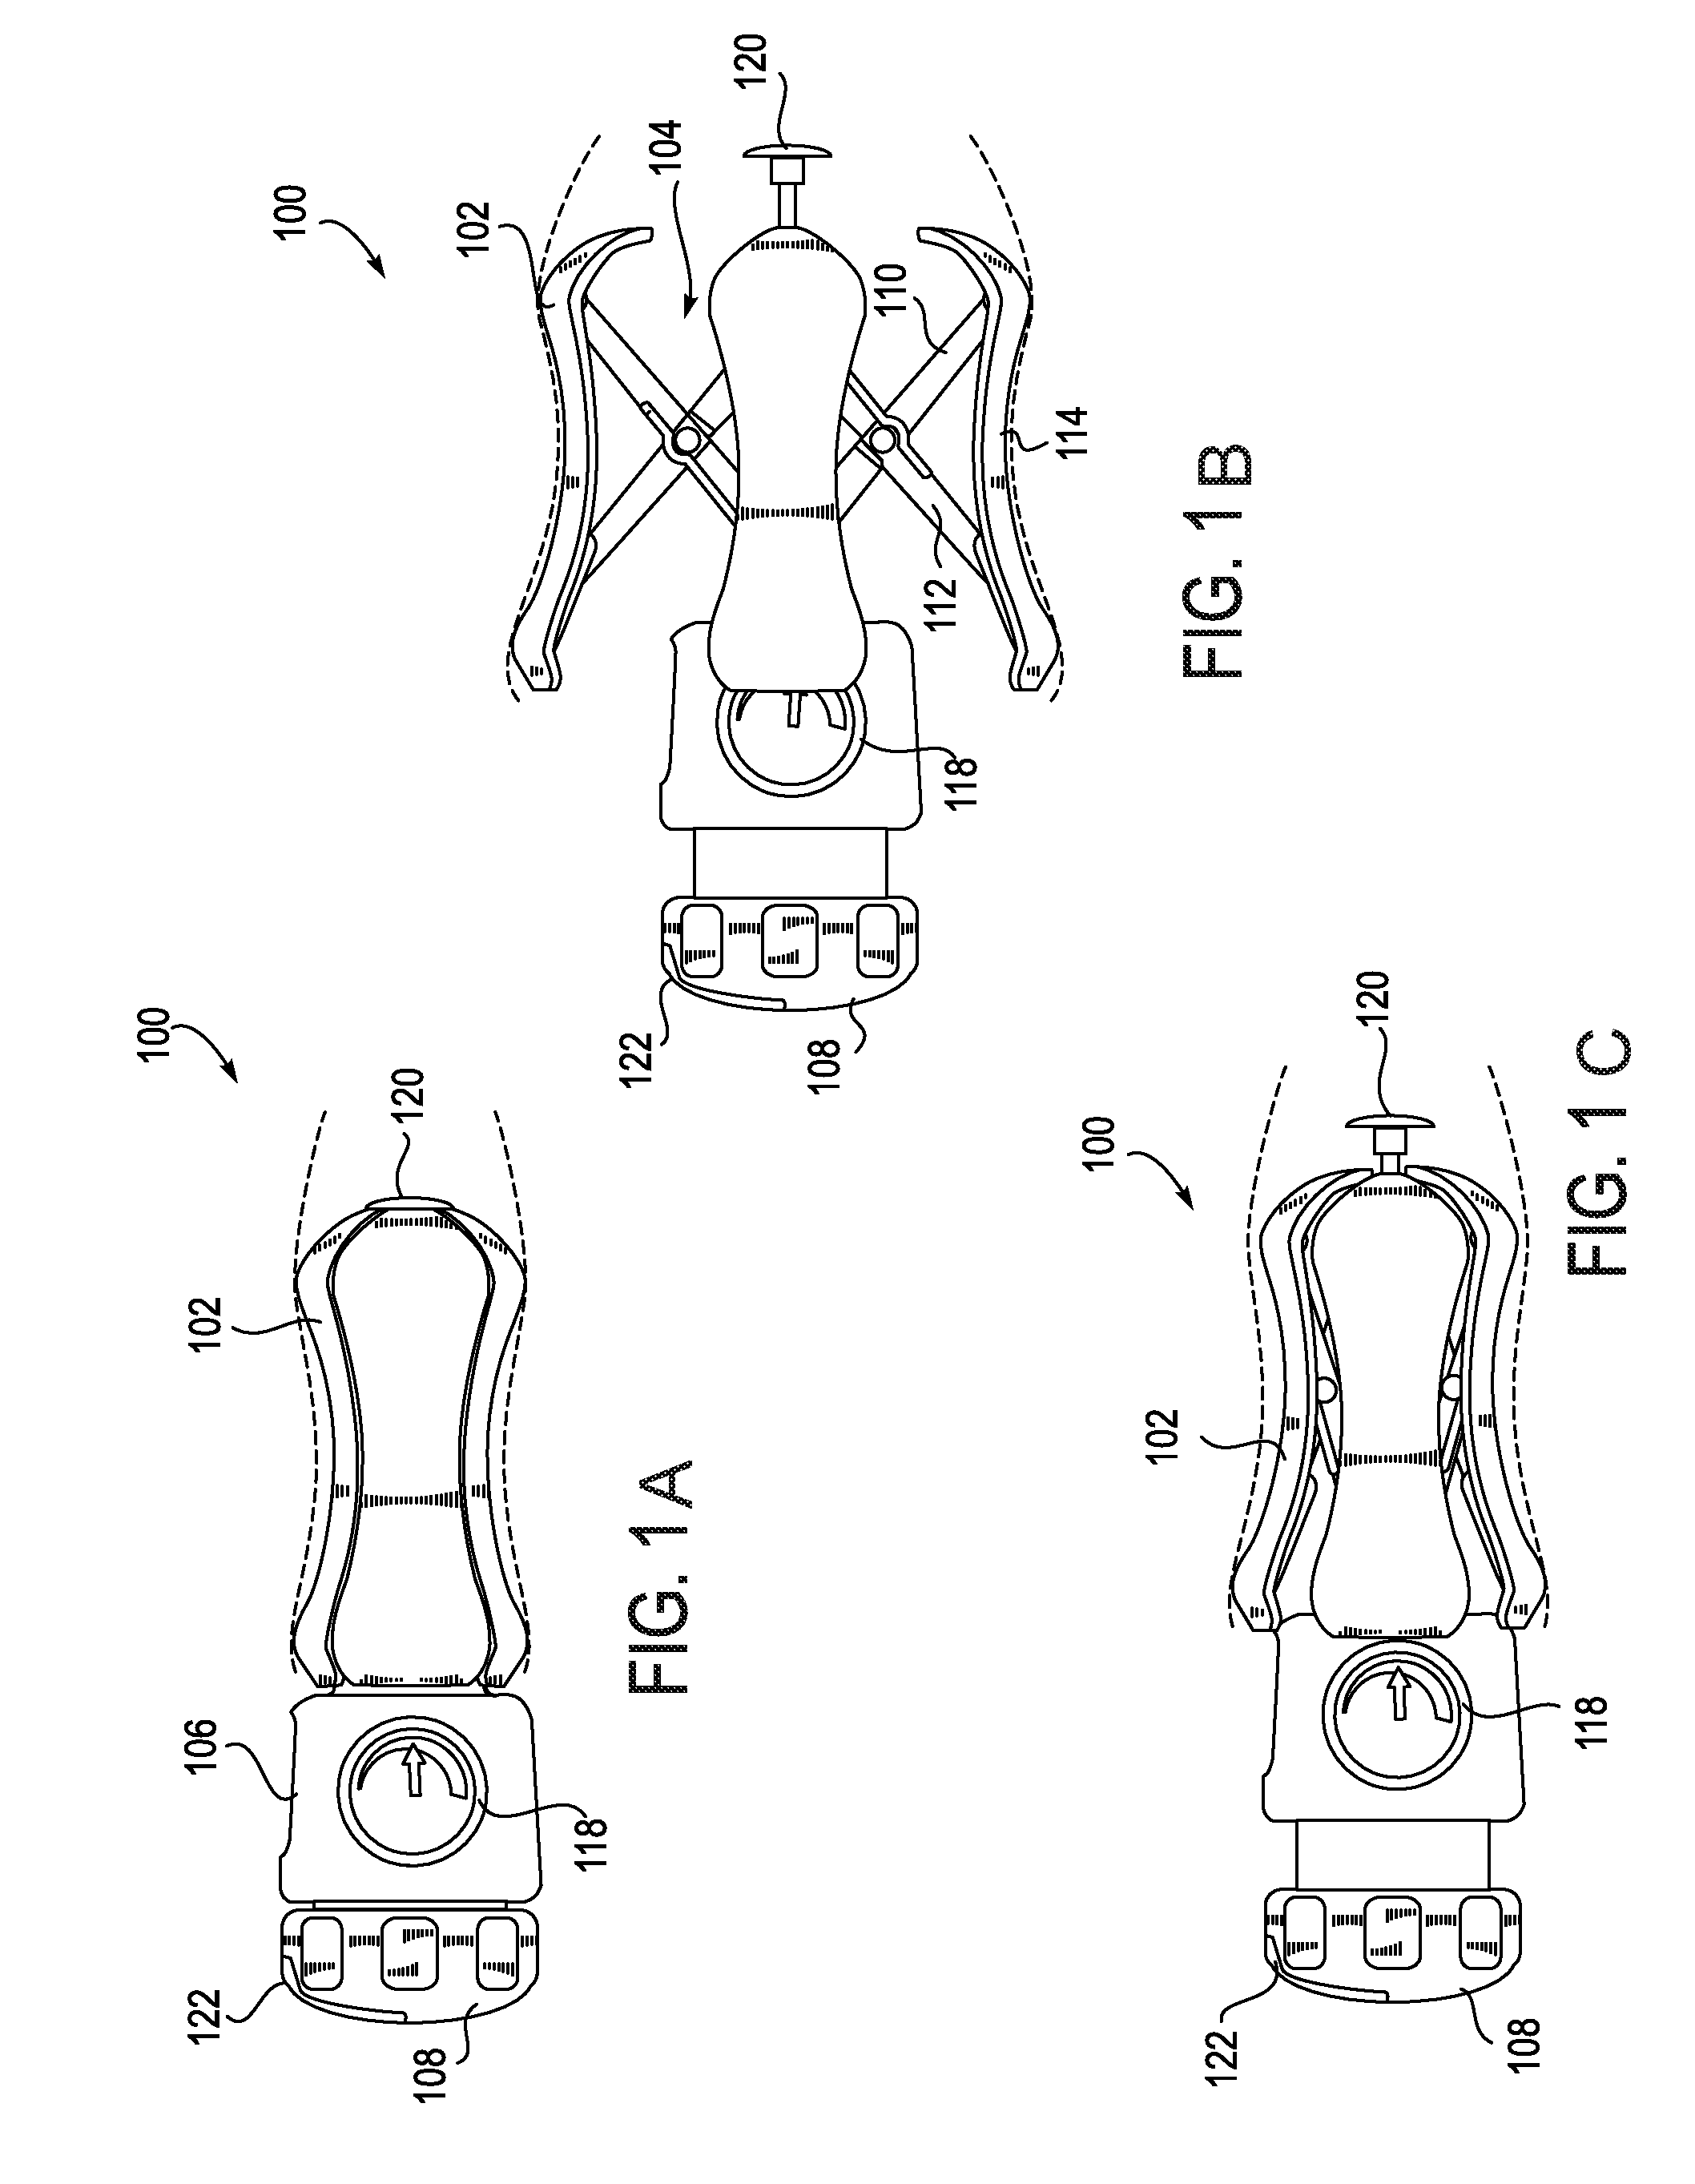 Methods and apparatus for preventing vaginal lacerations during childbirth